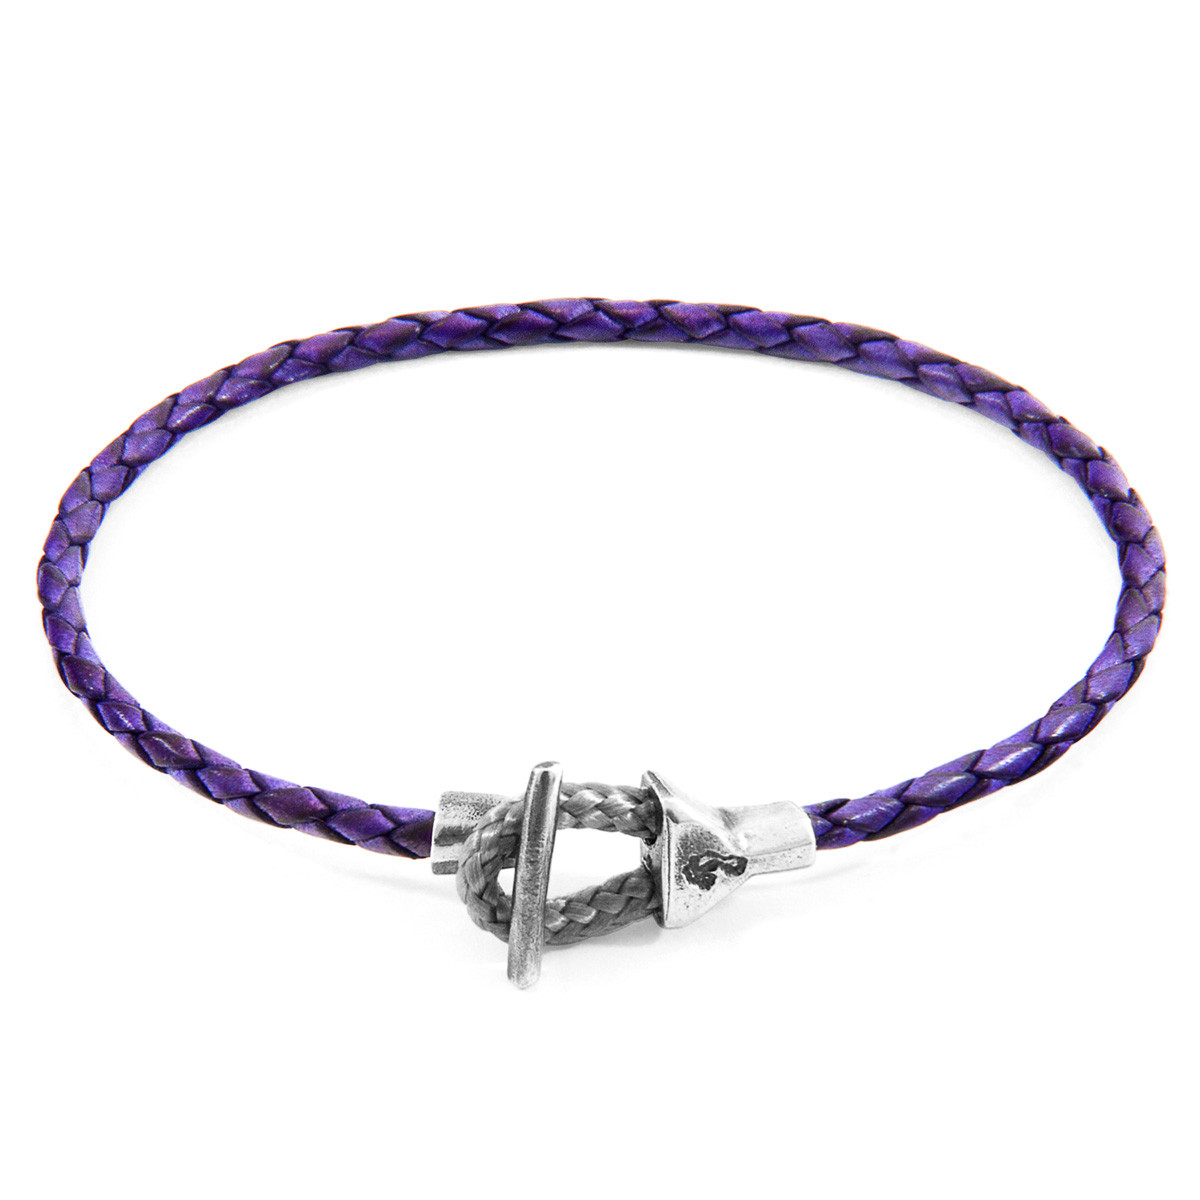 Anchor & Crew Grape Purple Cullen Silver and Braided Leather Bracelet